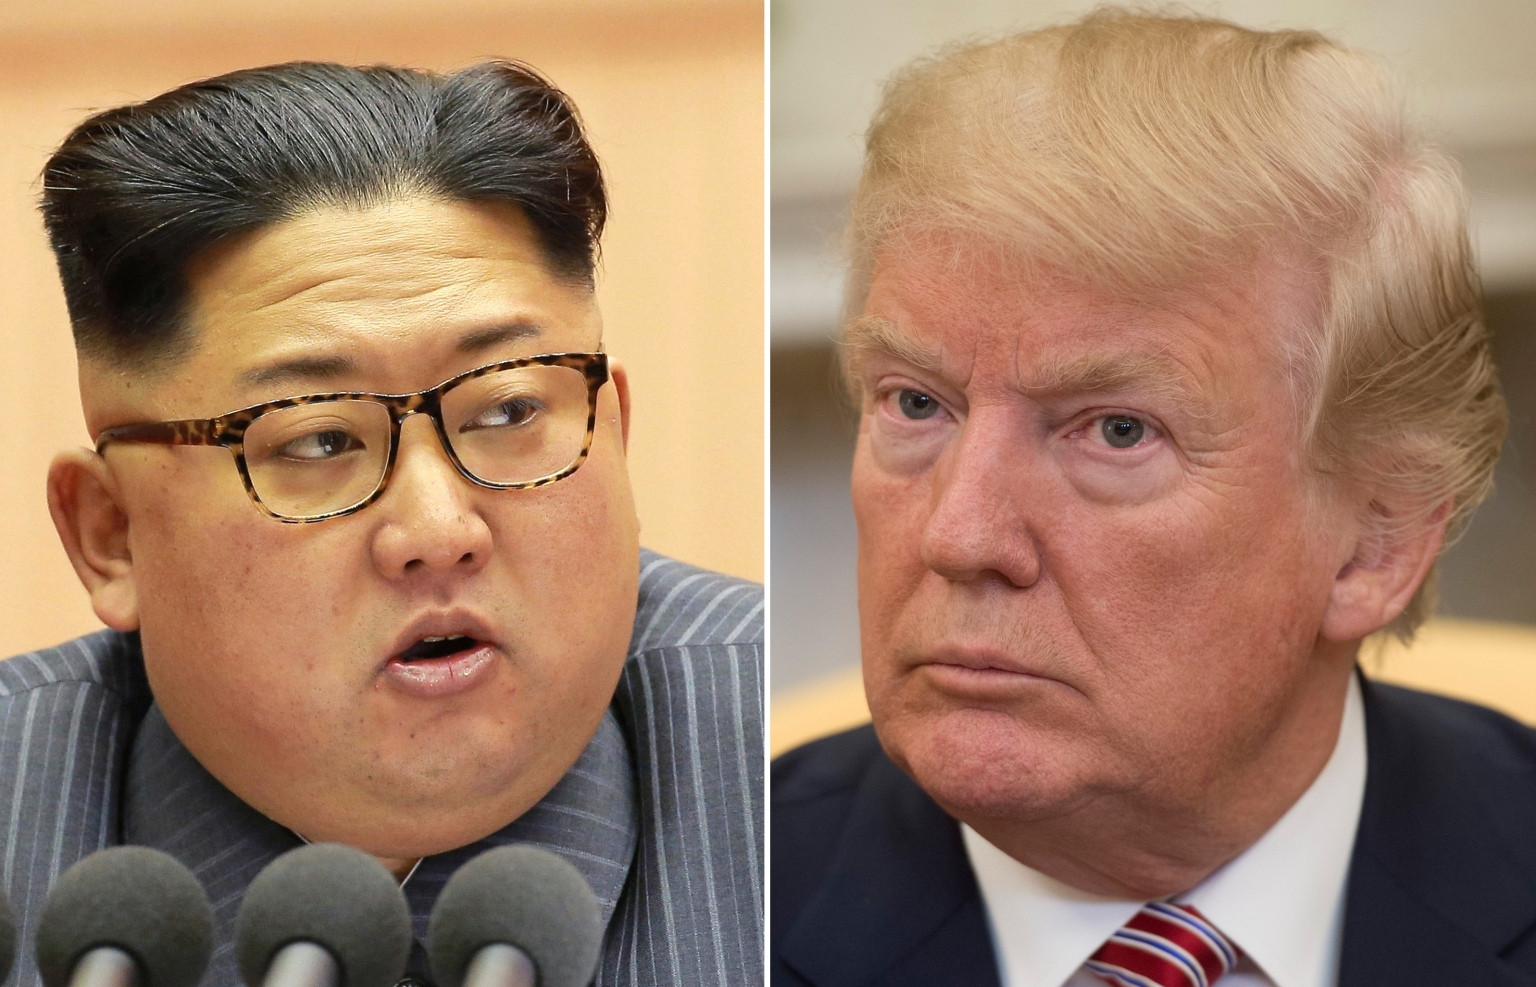 Trump dangles White House invite for Kim – if Singapore summit goes well